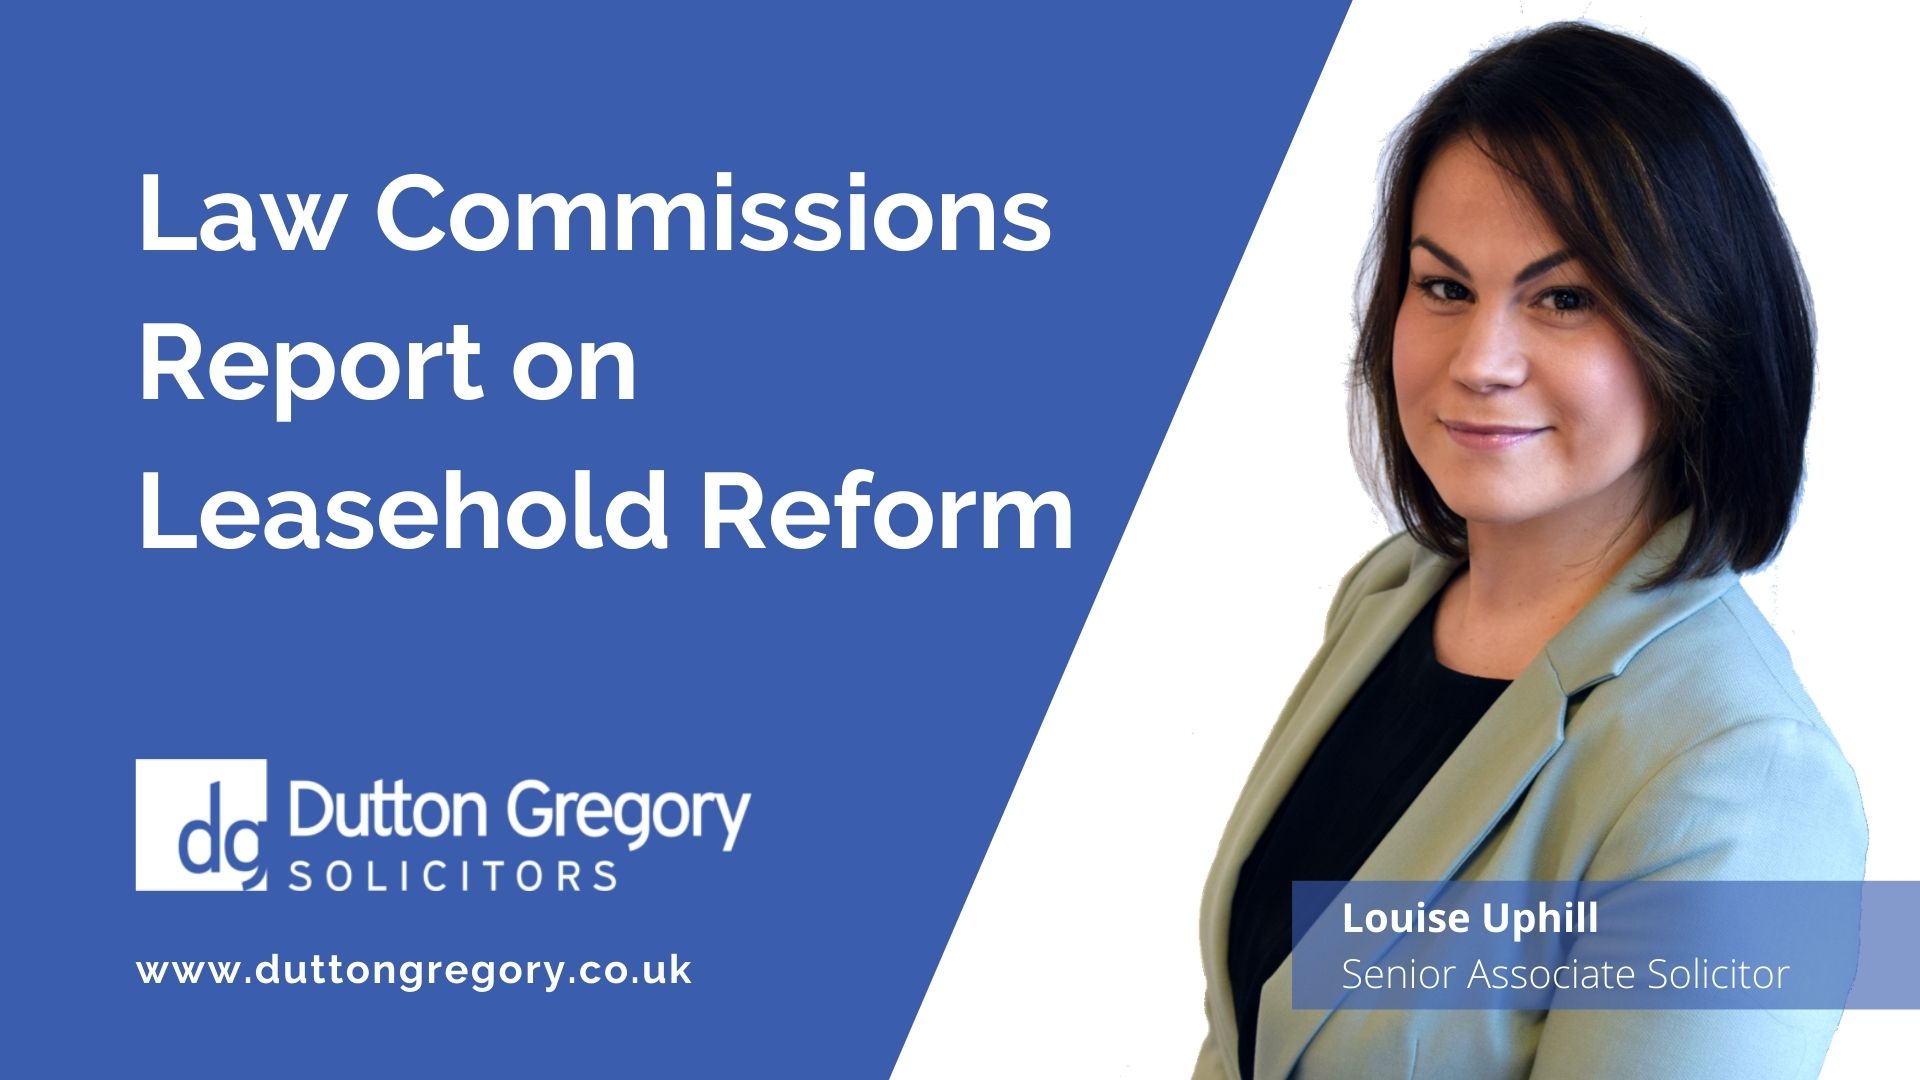 Law Commissions Report on Leasehold Reform